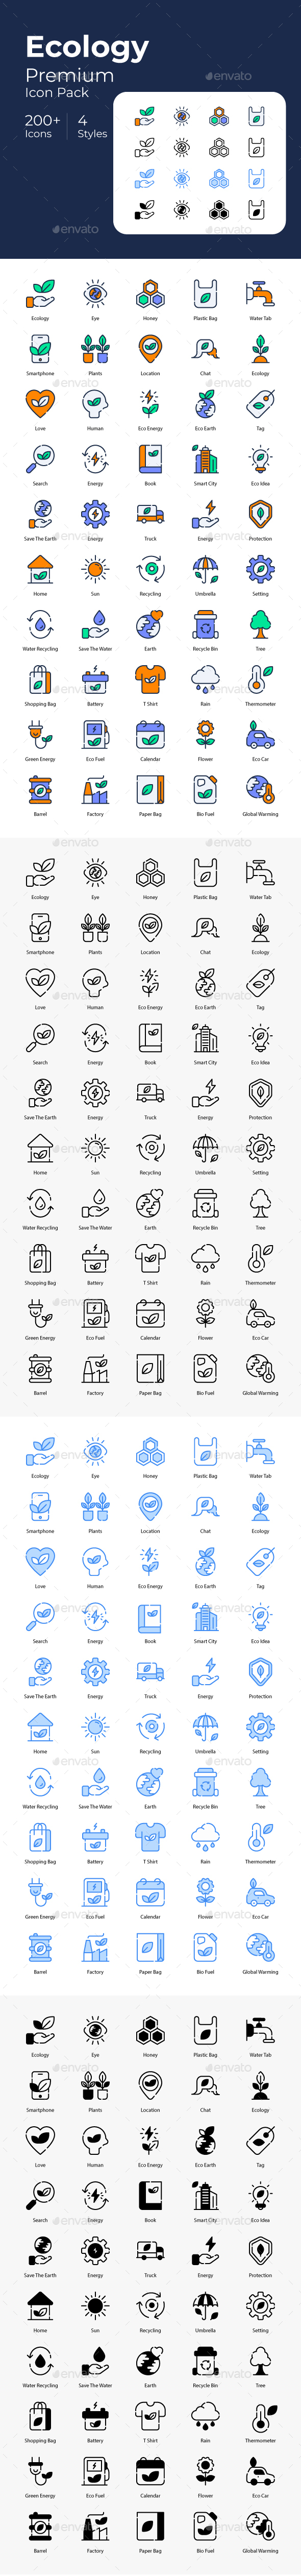 [DOWNLOAD]Ecology icons set